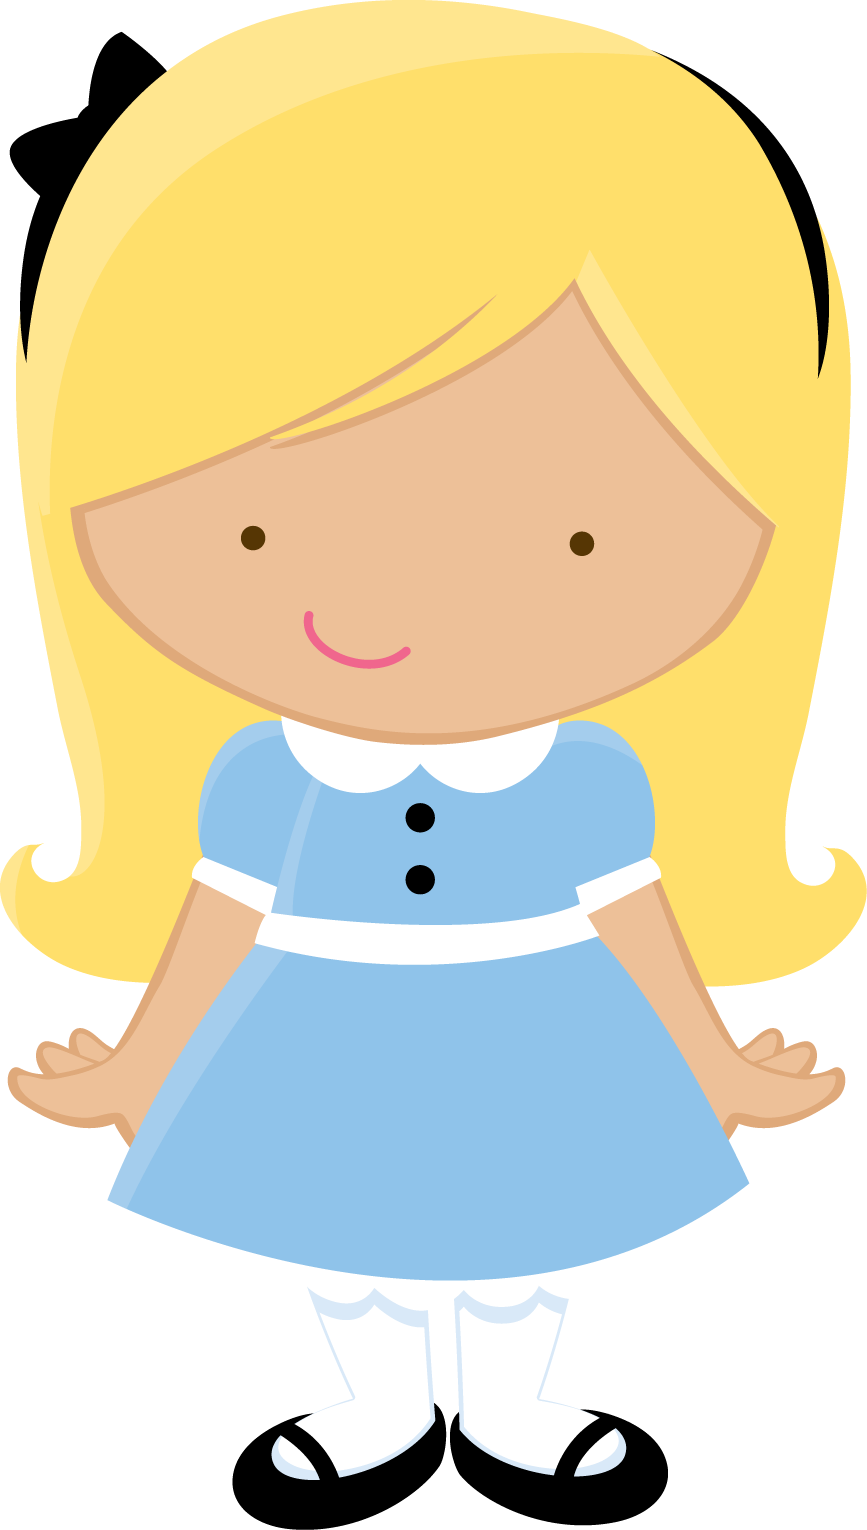 Zwd_Teapot   Zwd_Alice.png   Minus - Cute, Transparent background PNG HD thumbnail